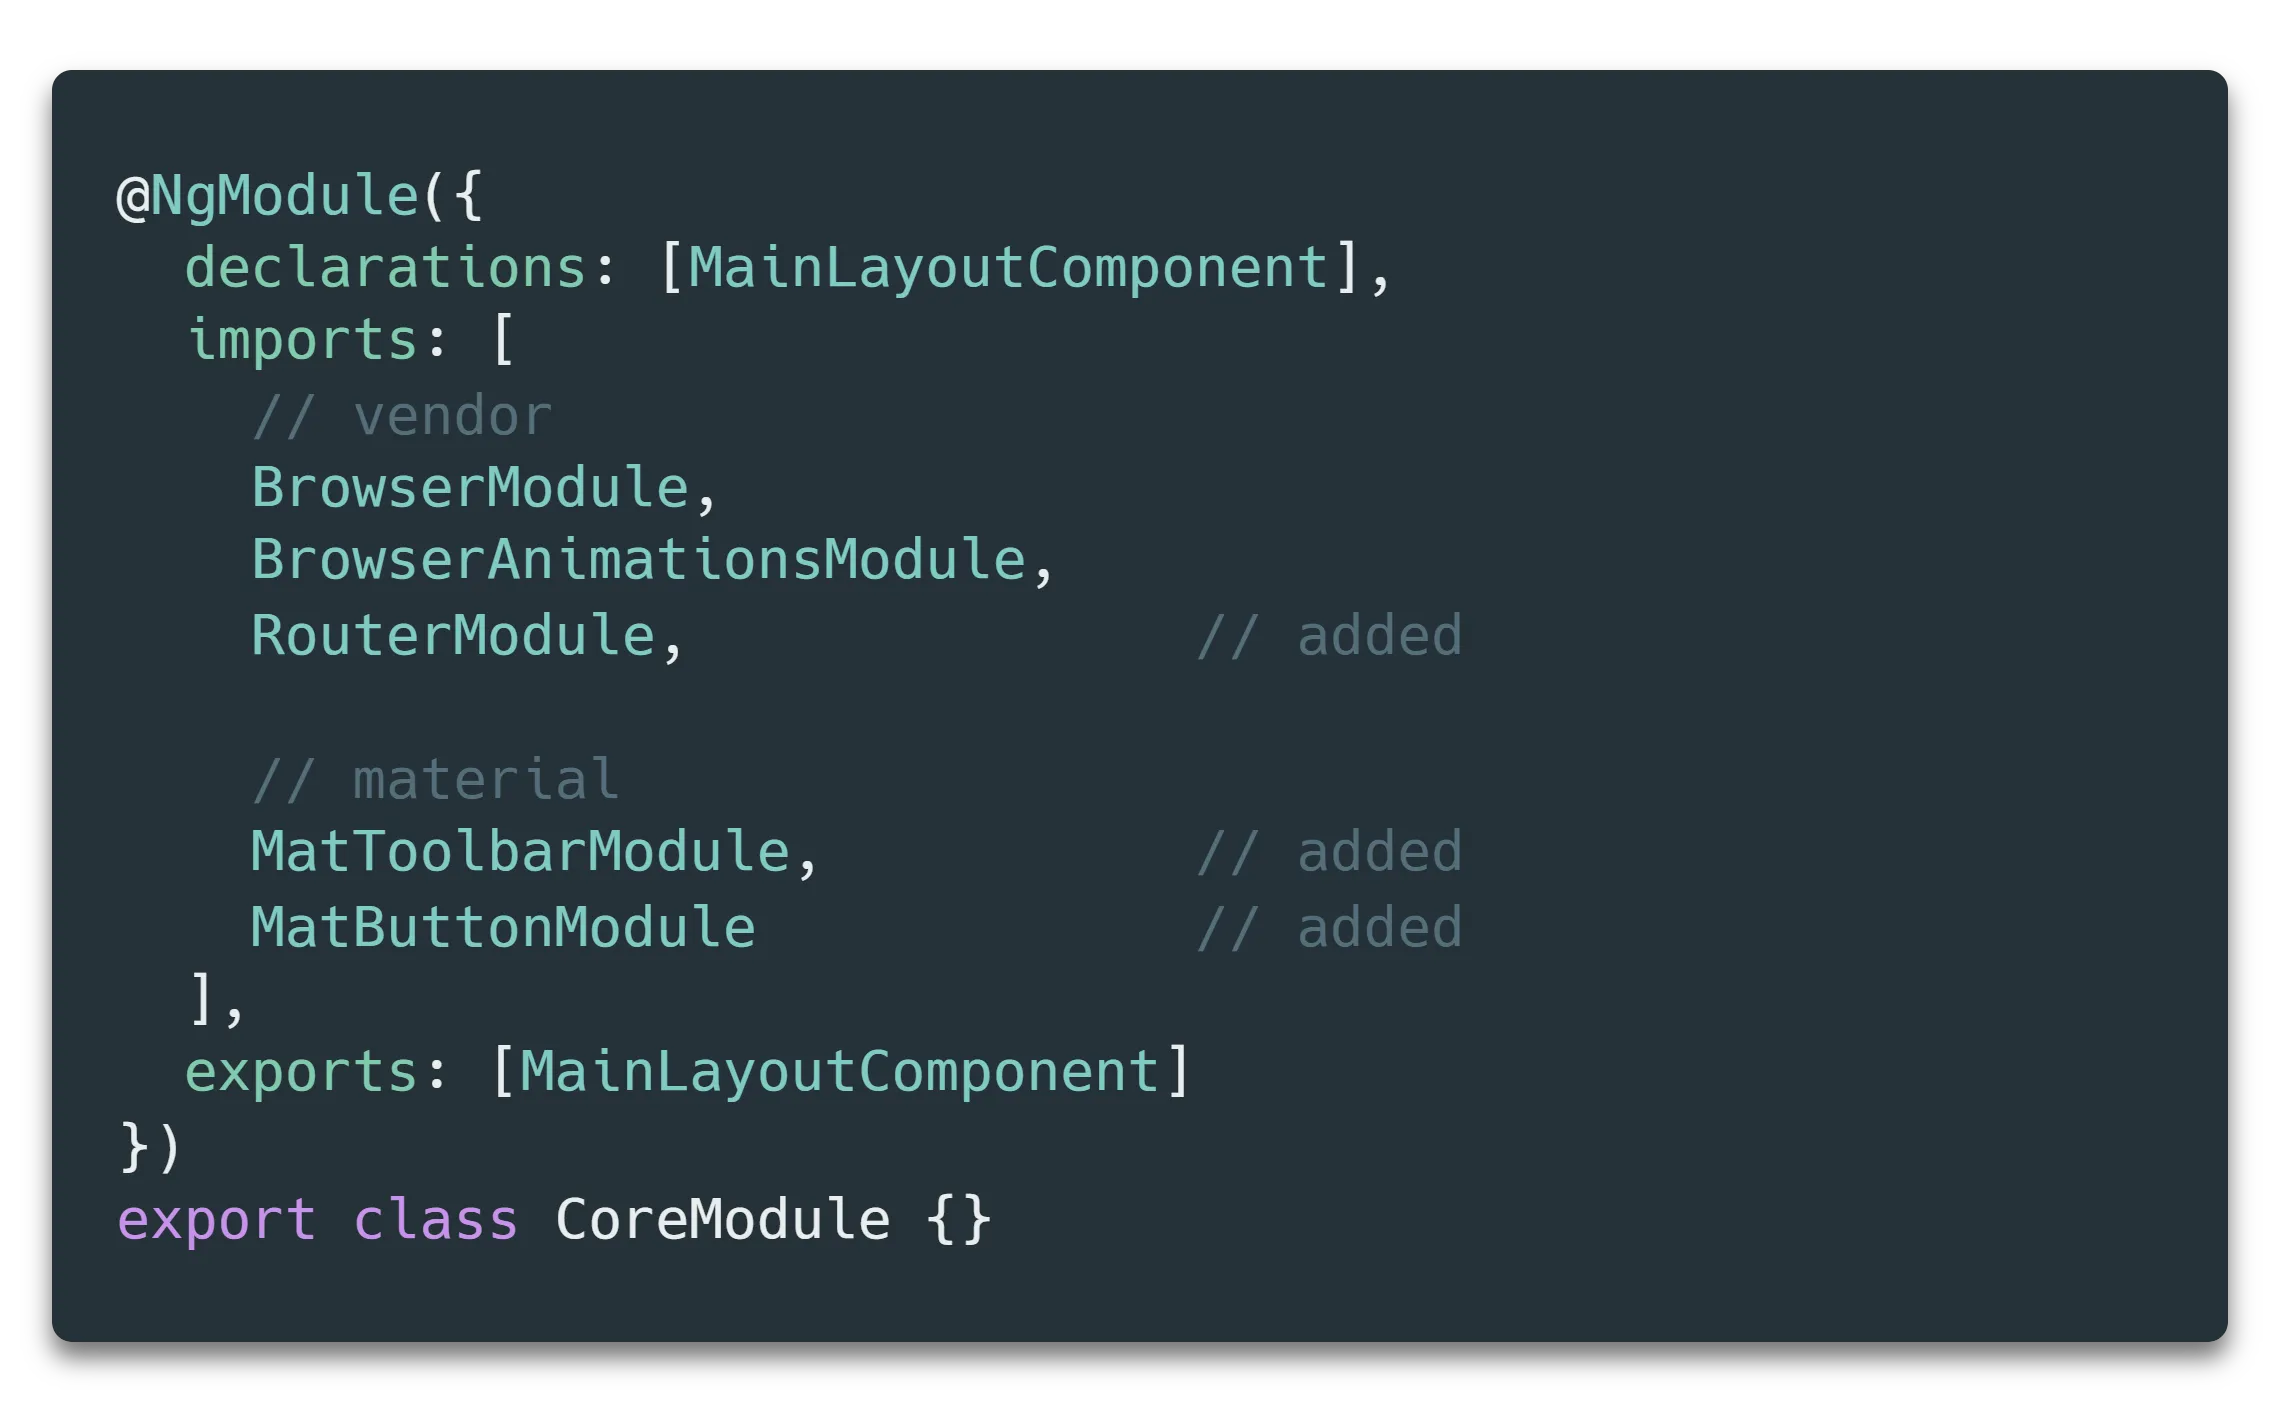 Please notice helpful import grouping and comments like **// vendor** and **// material** … They are NOT mandatory but nice to have because they let your colleagues (or even you in the future) get a quick overview of the module structure compared to long randomly sorted list of imports!